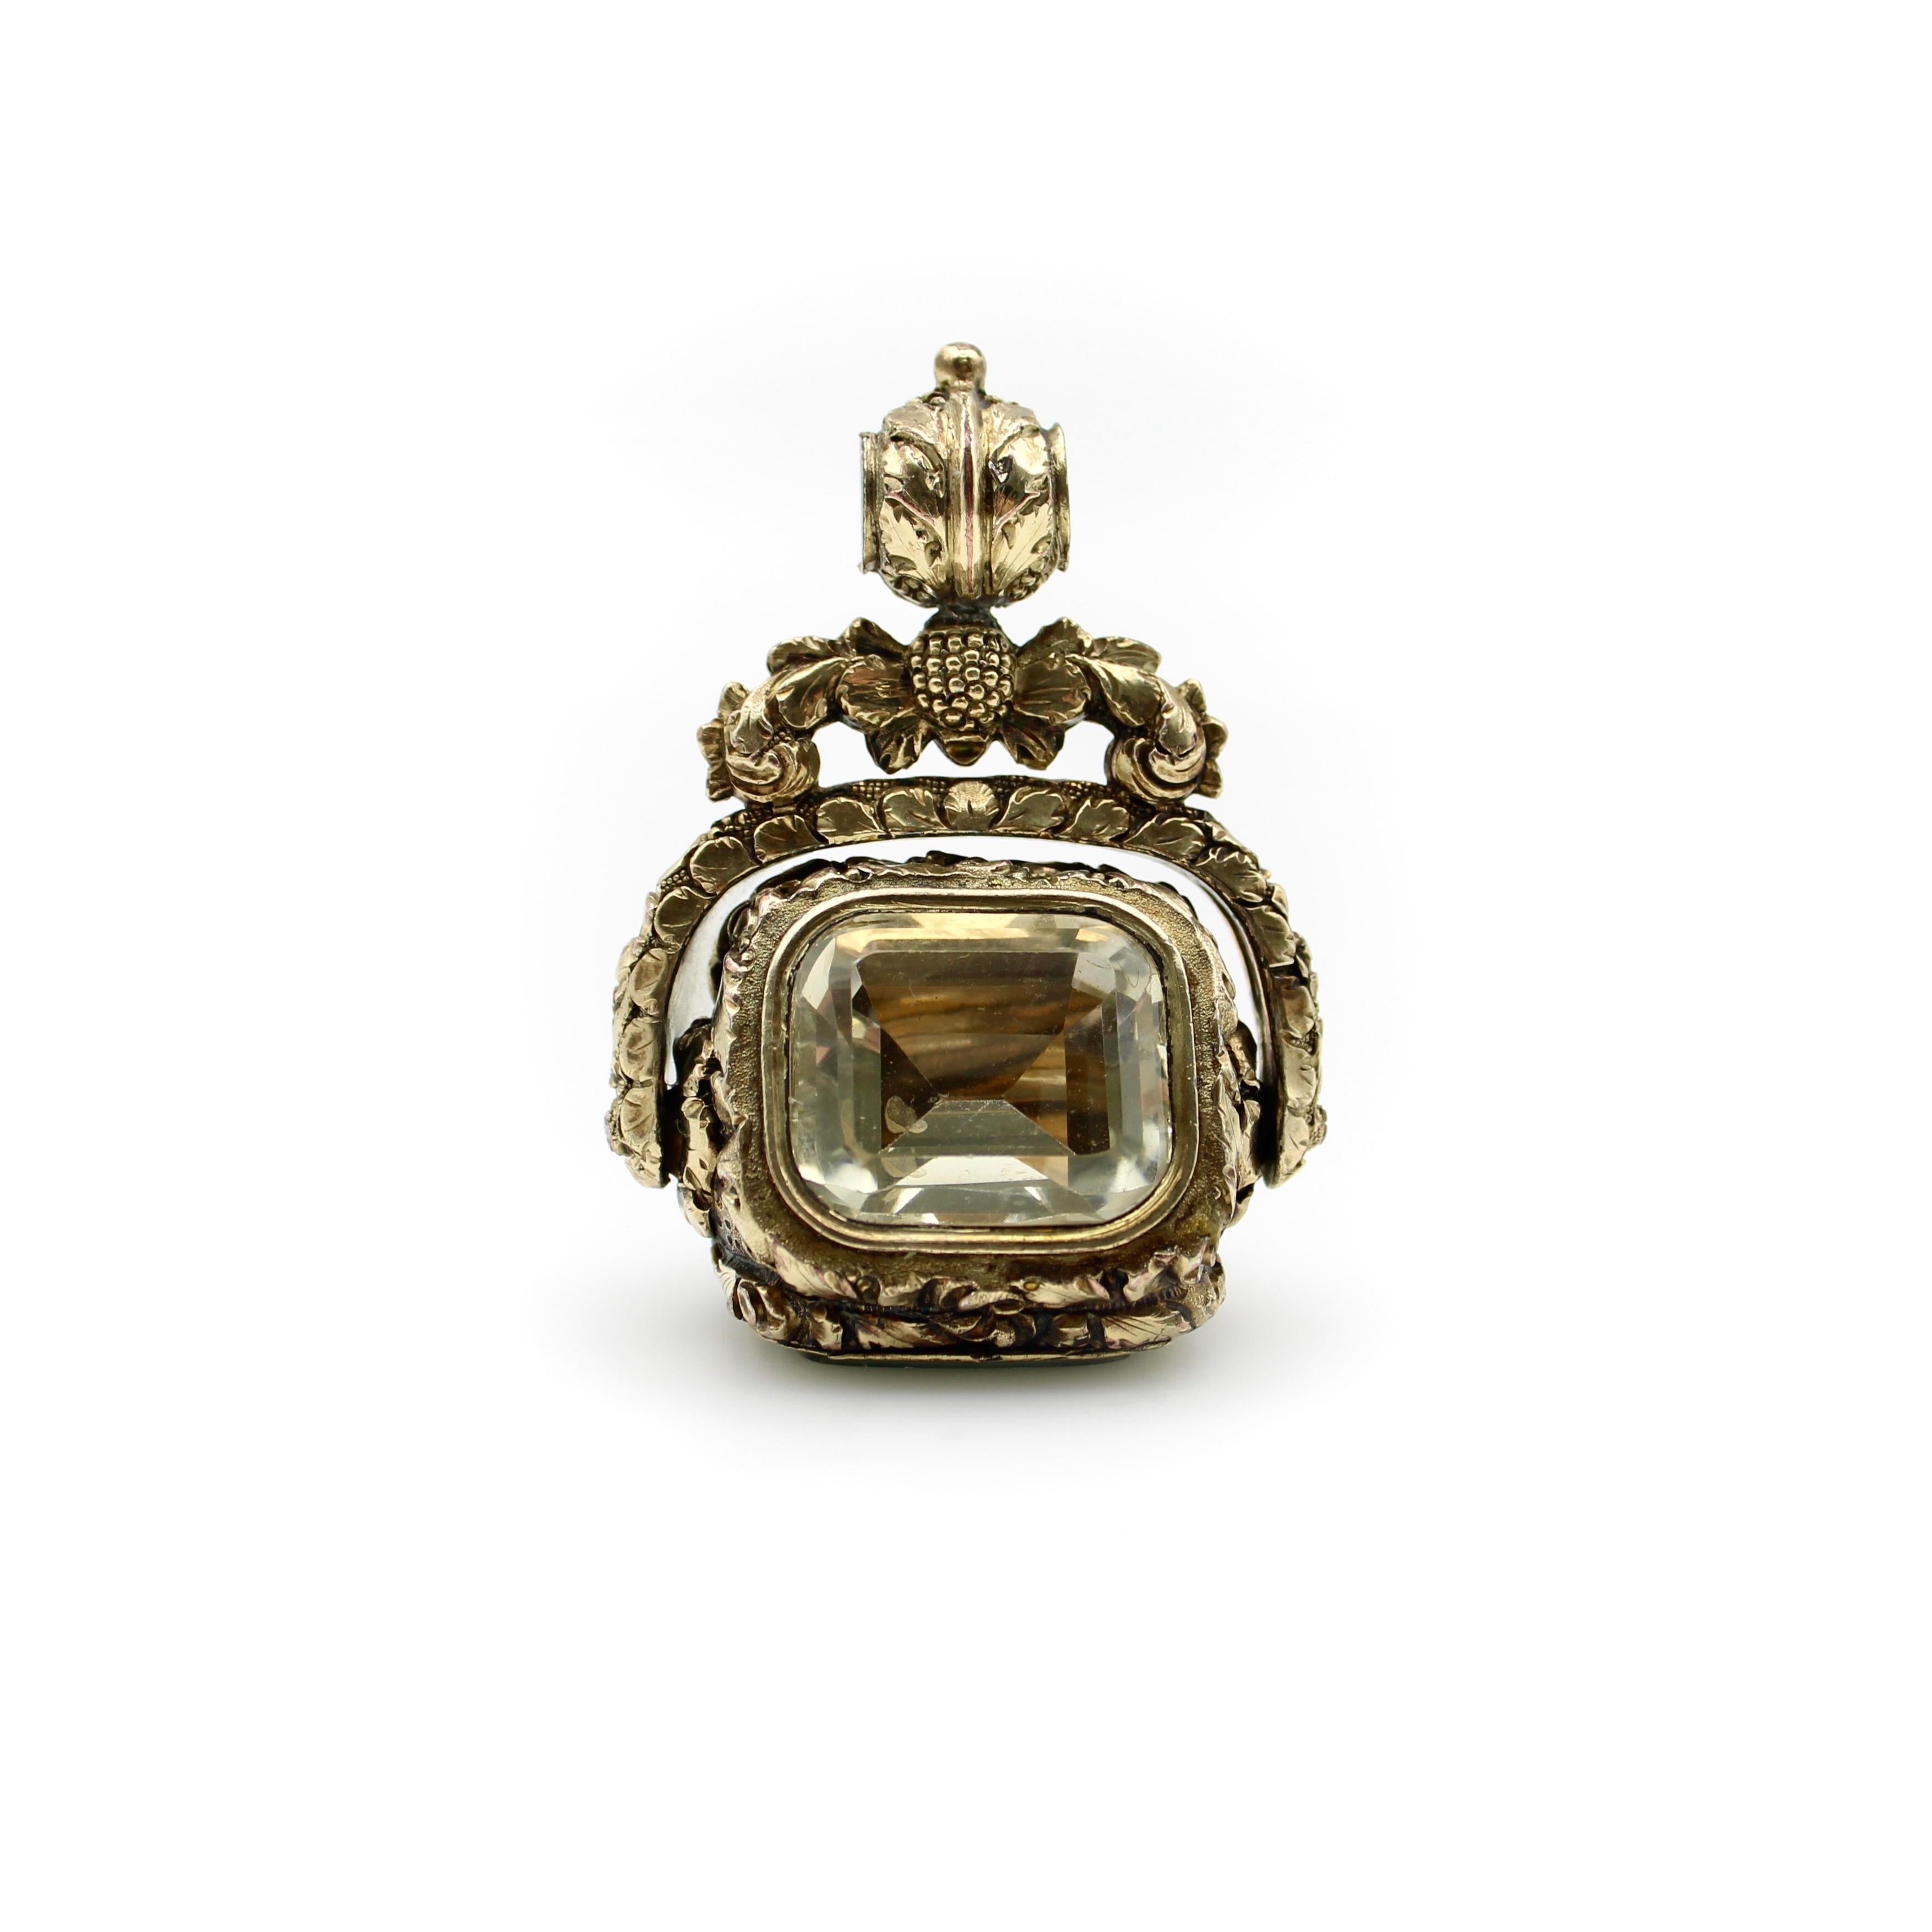 This impressive Georgian fob has three unique panels, and is built in a way that allows the fob to rotate, revealing the ornate details of each panel as the fob spins. One panel contains a sculptural still life behind a bezeled crystal pane, like a